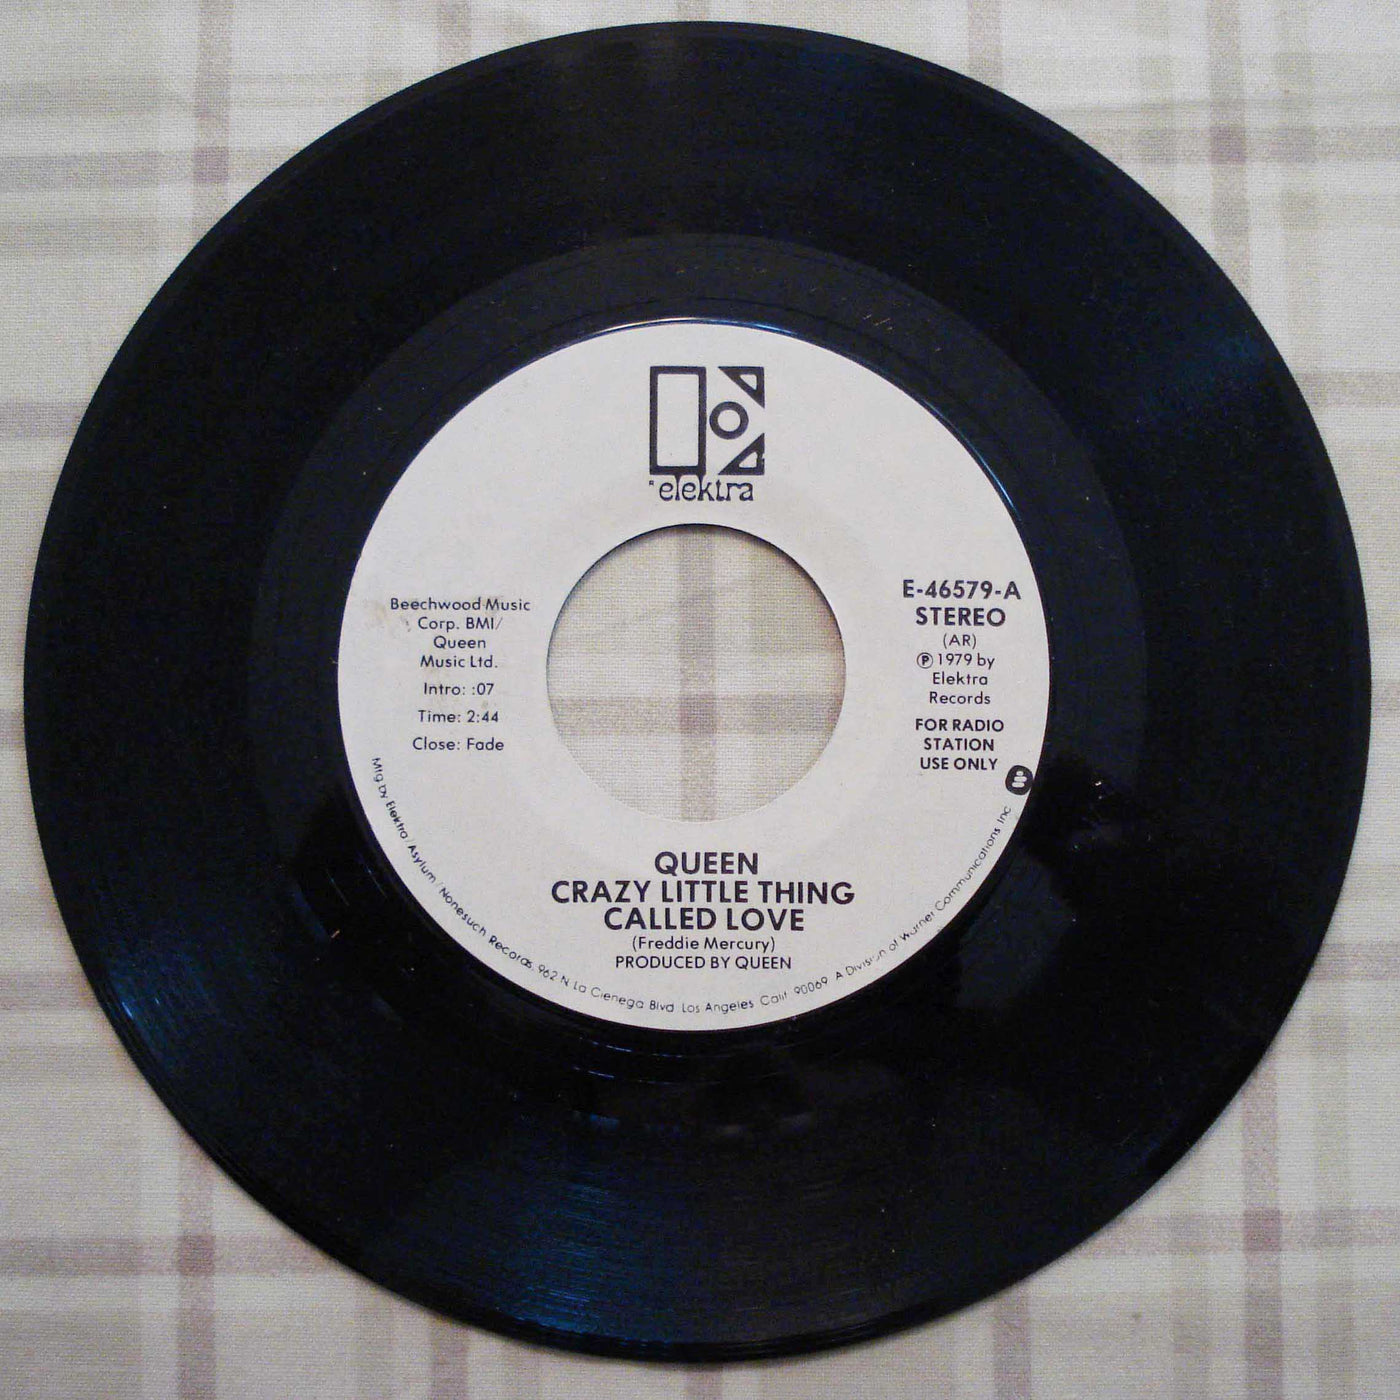 Queen - Crazy Little Thing Called Love Mono-Stereo (1979) Vinyl Single 45rpm E-46579-A